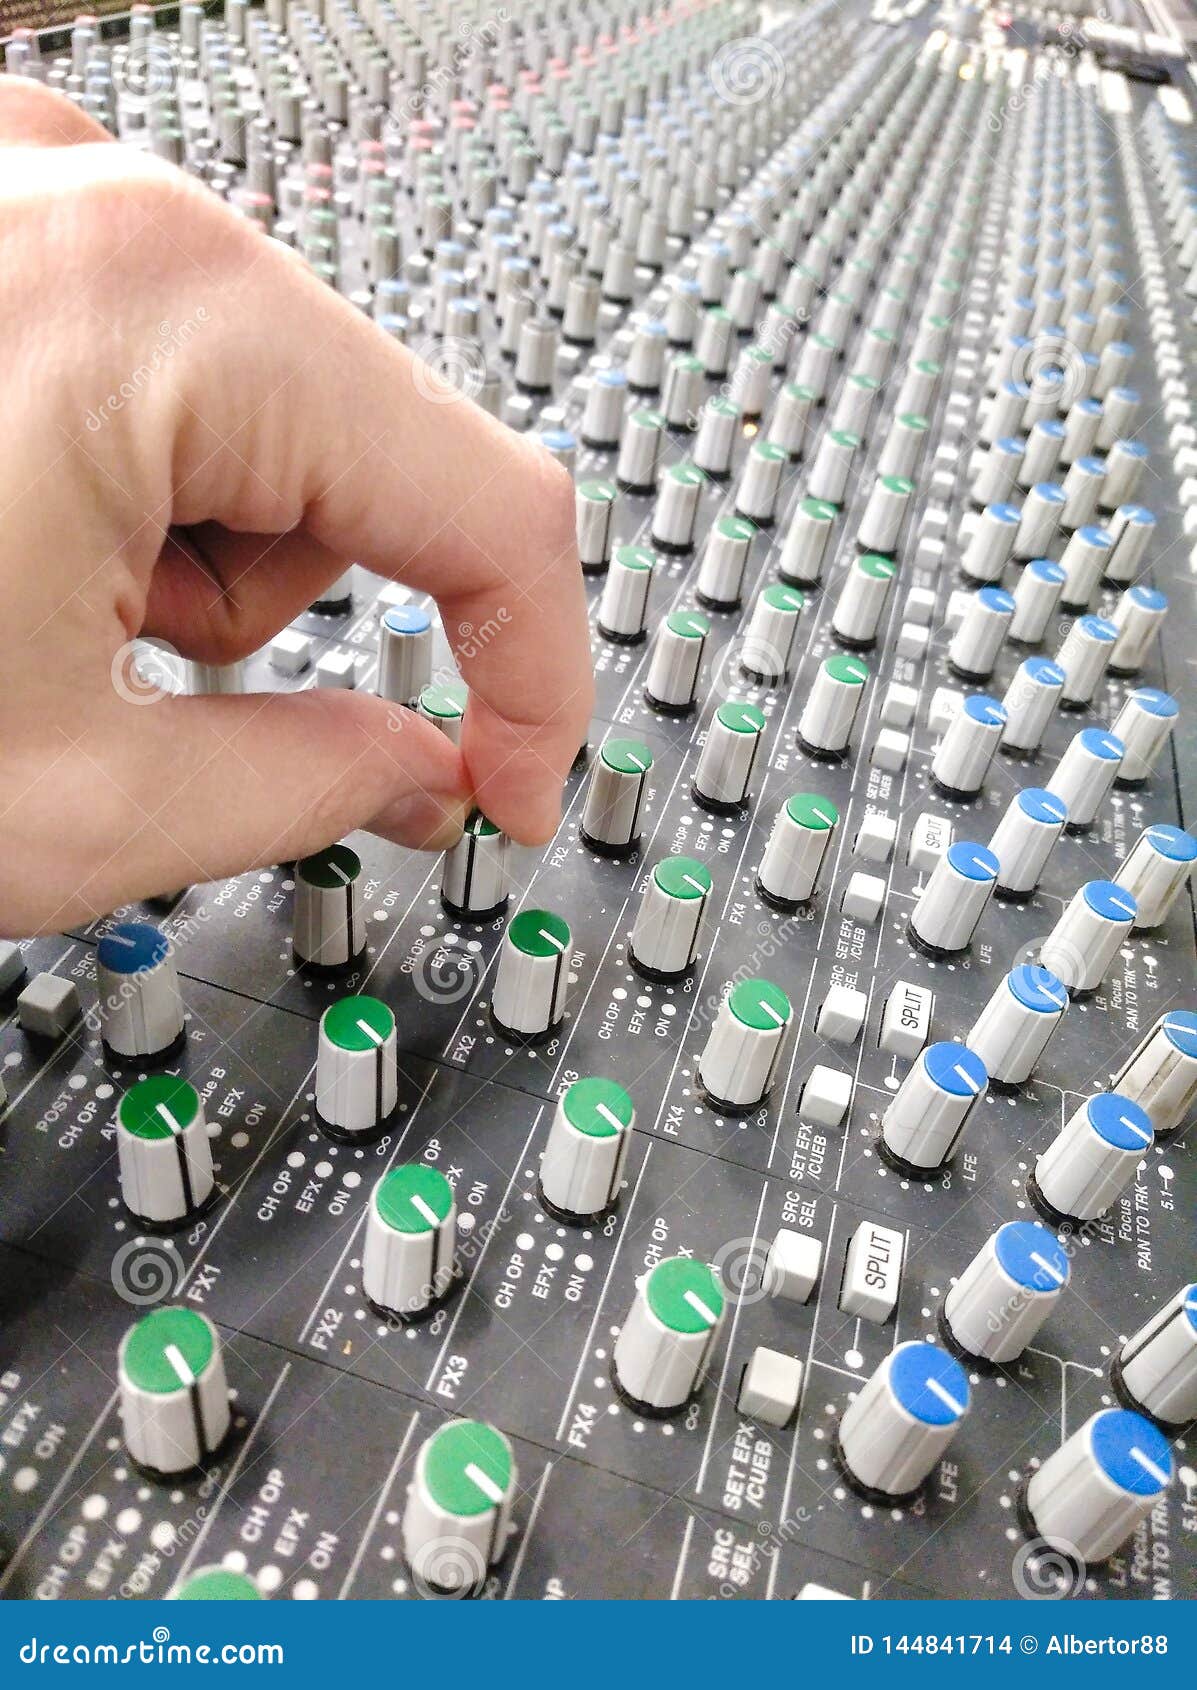 mixer console with hand